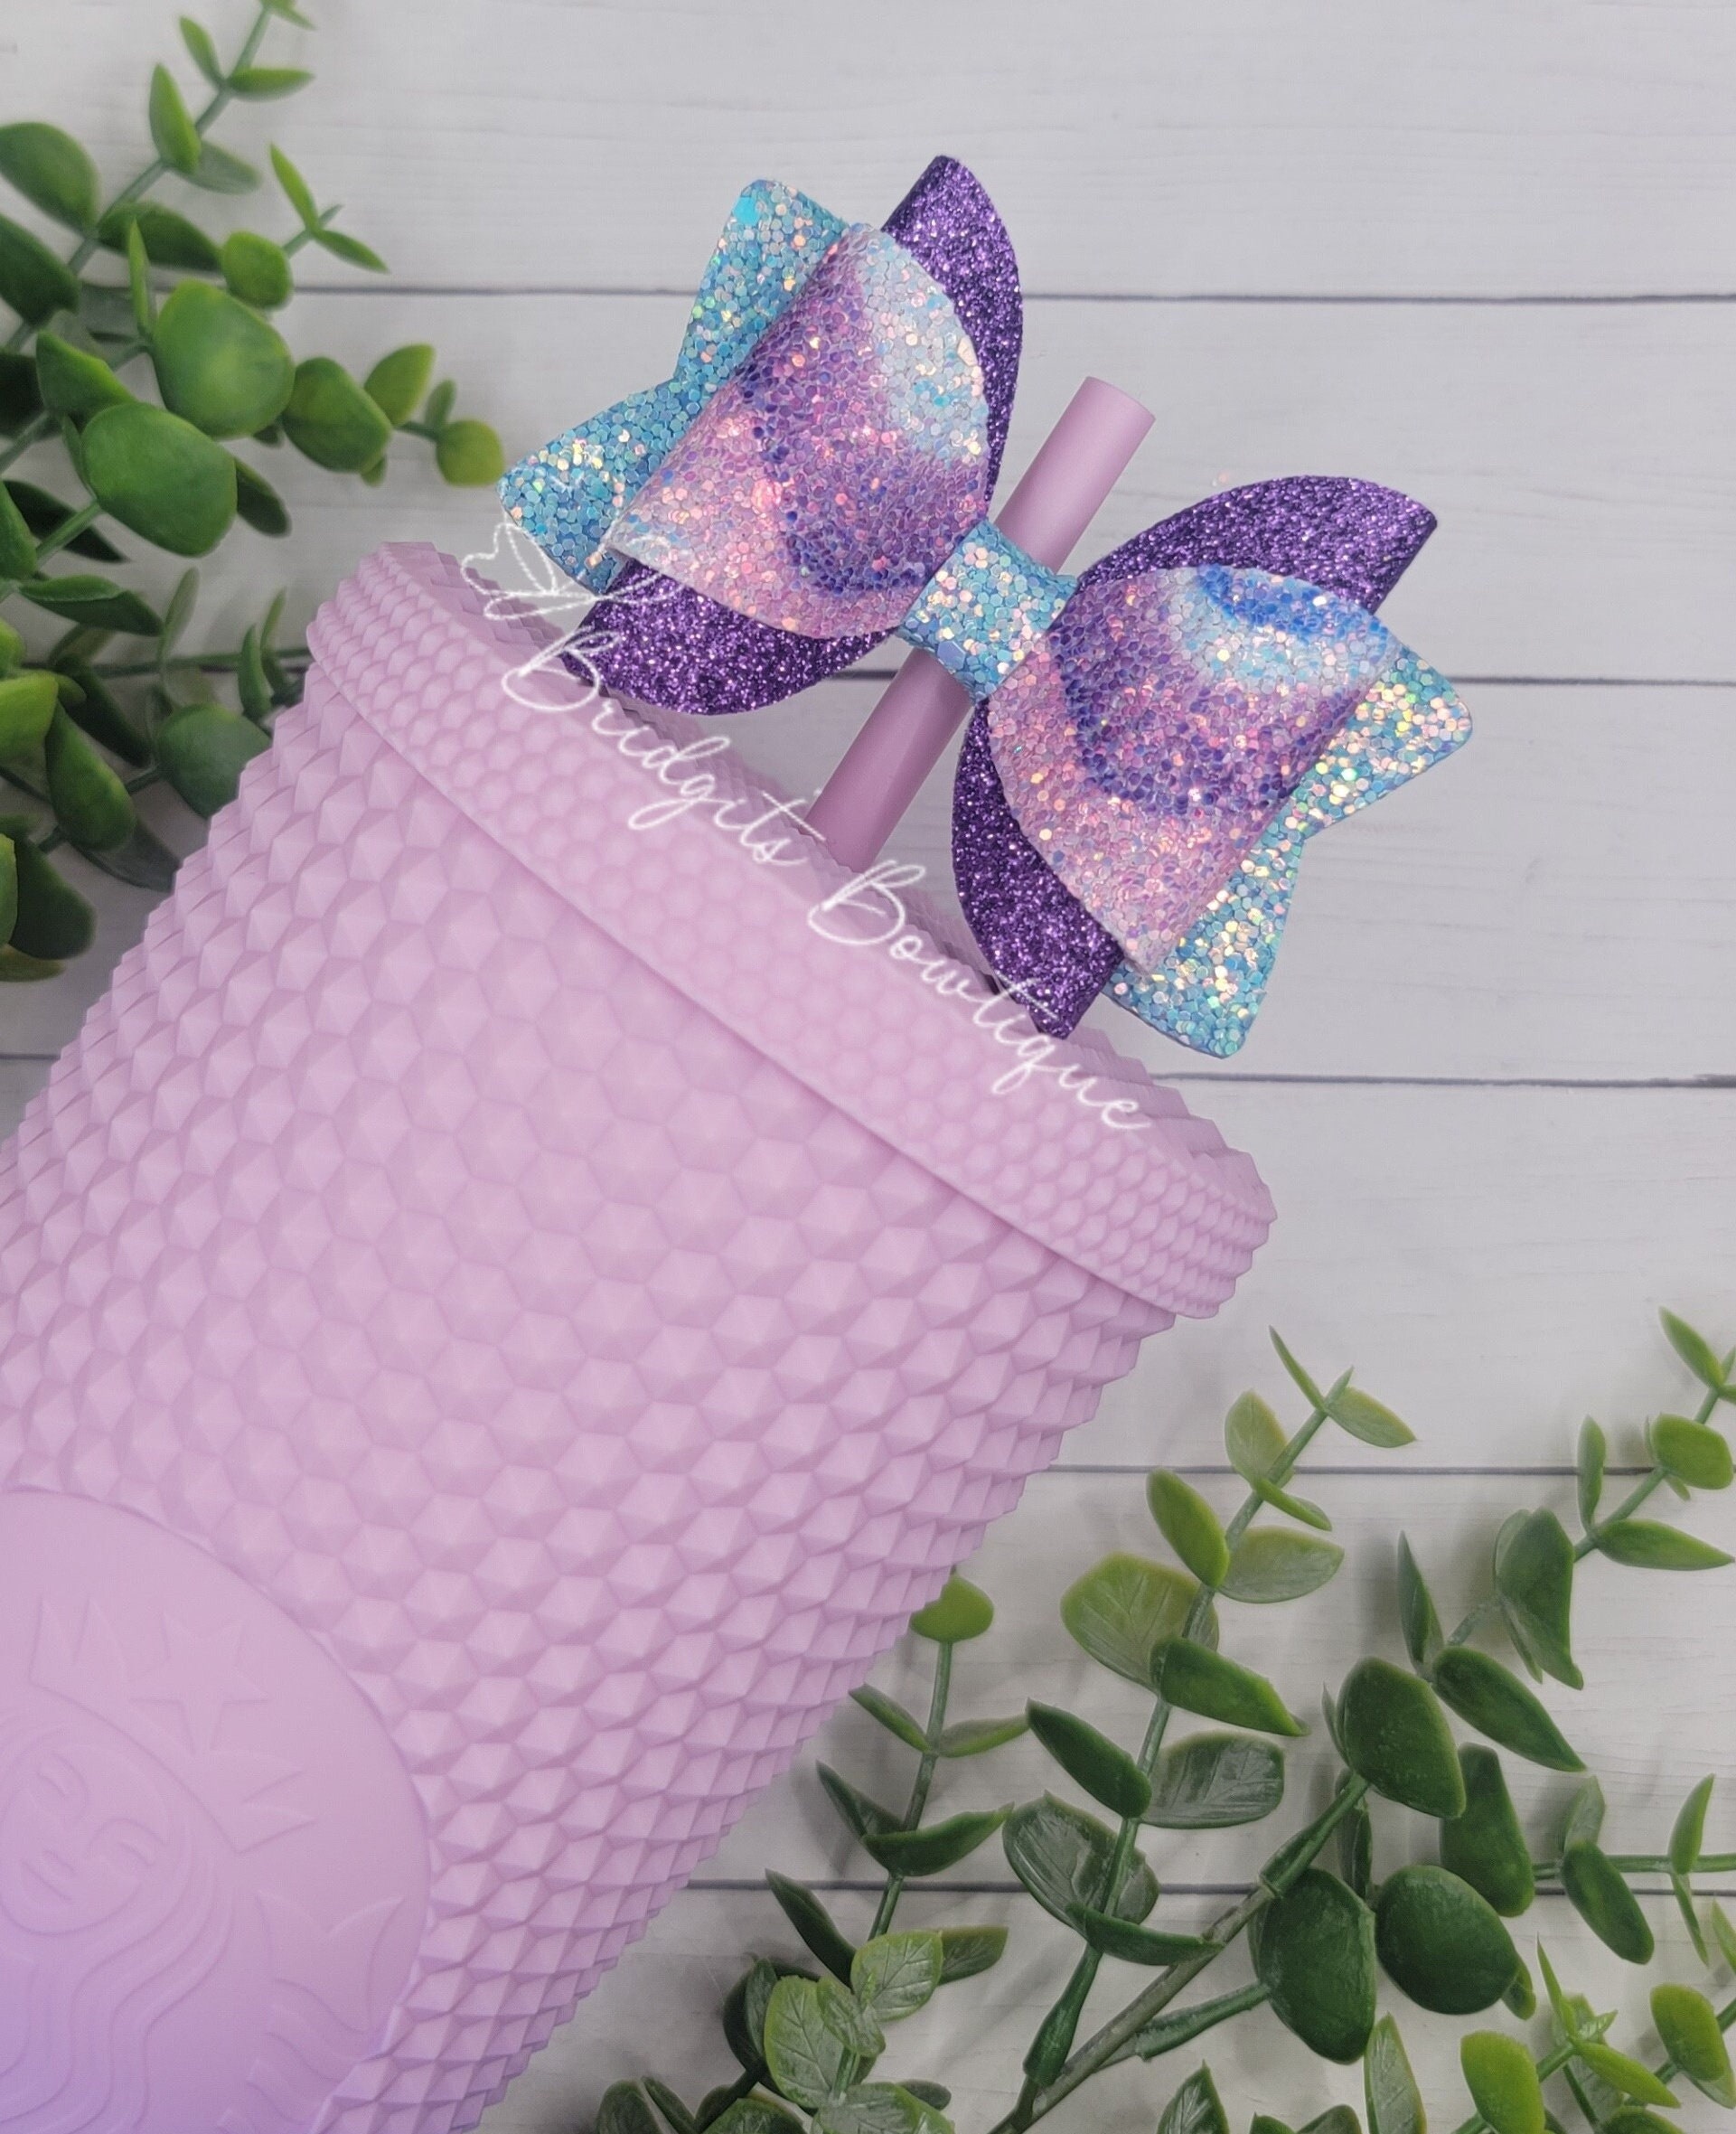 Straw Topper Mouse Light Purple Lavender Lilac White Glitter Shiny Studded  Cup Tumbler Toppers 